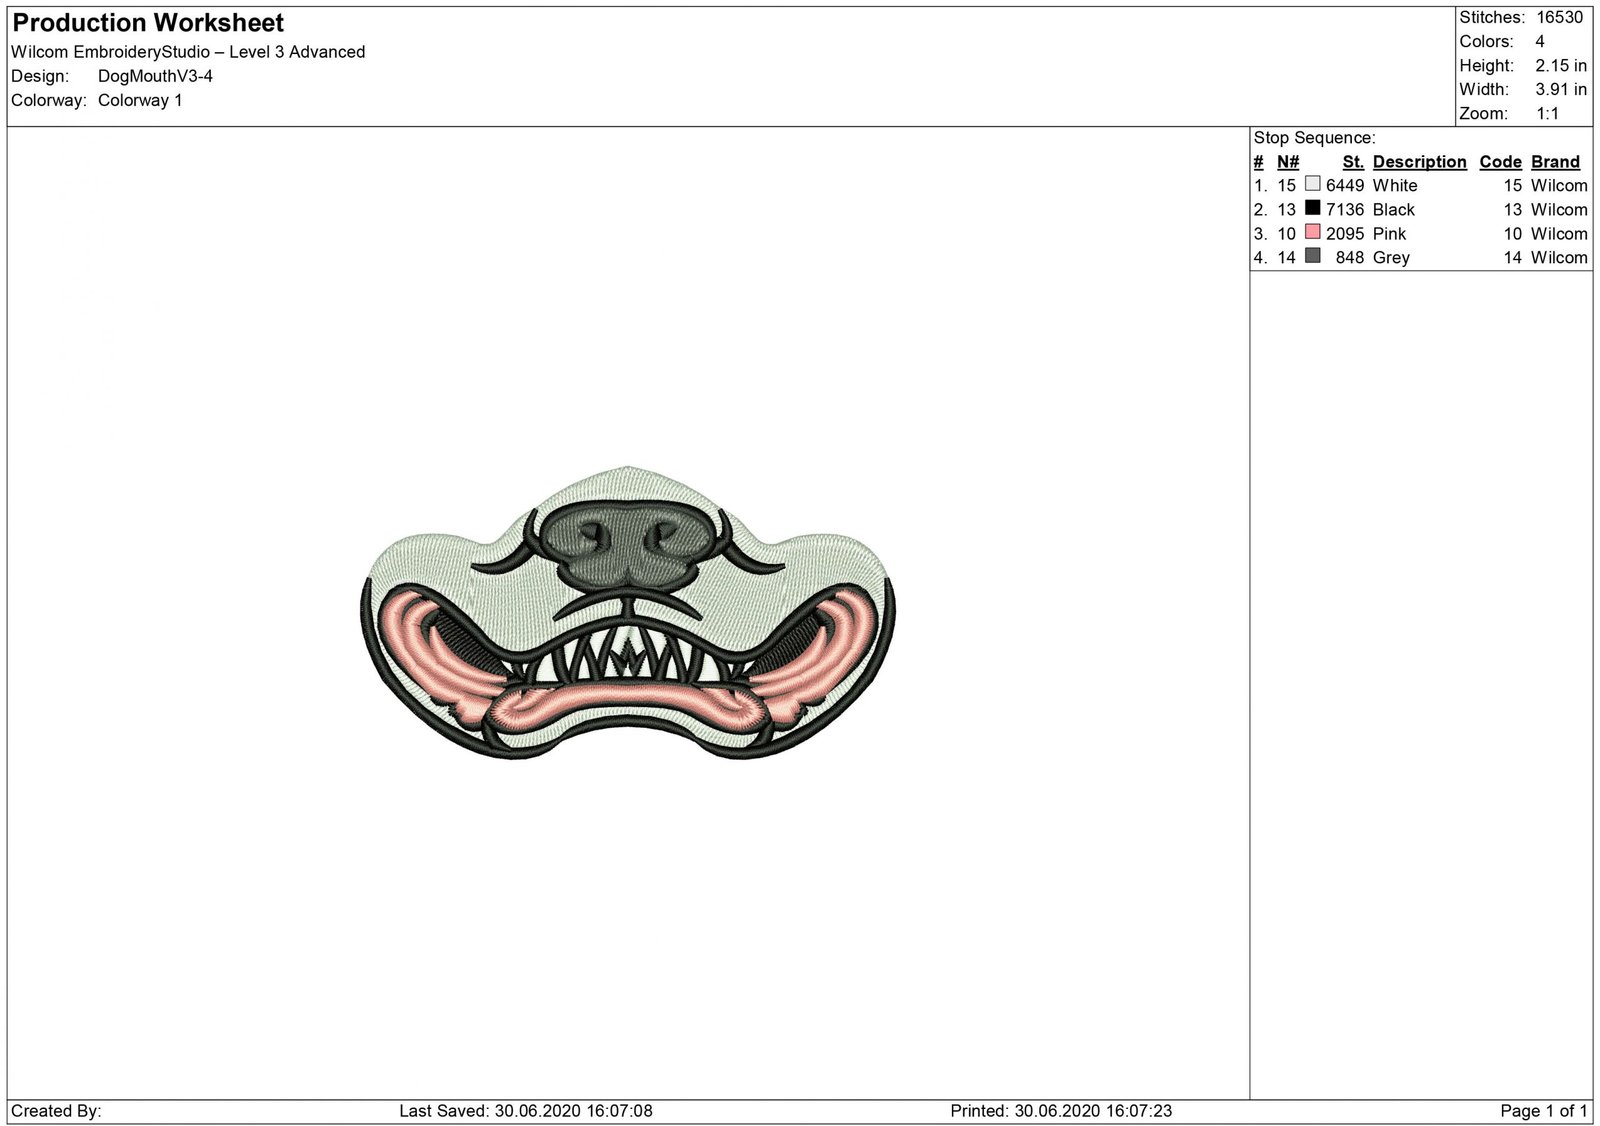 Dog Mouth | Machine Embroidery designs and SVG files